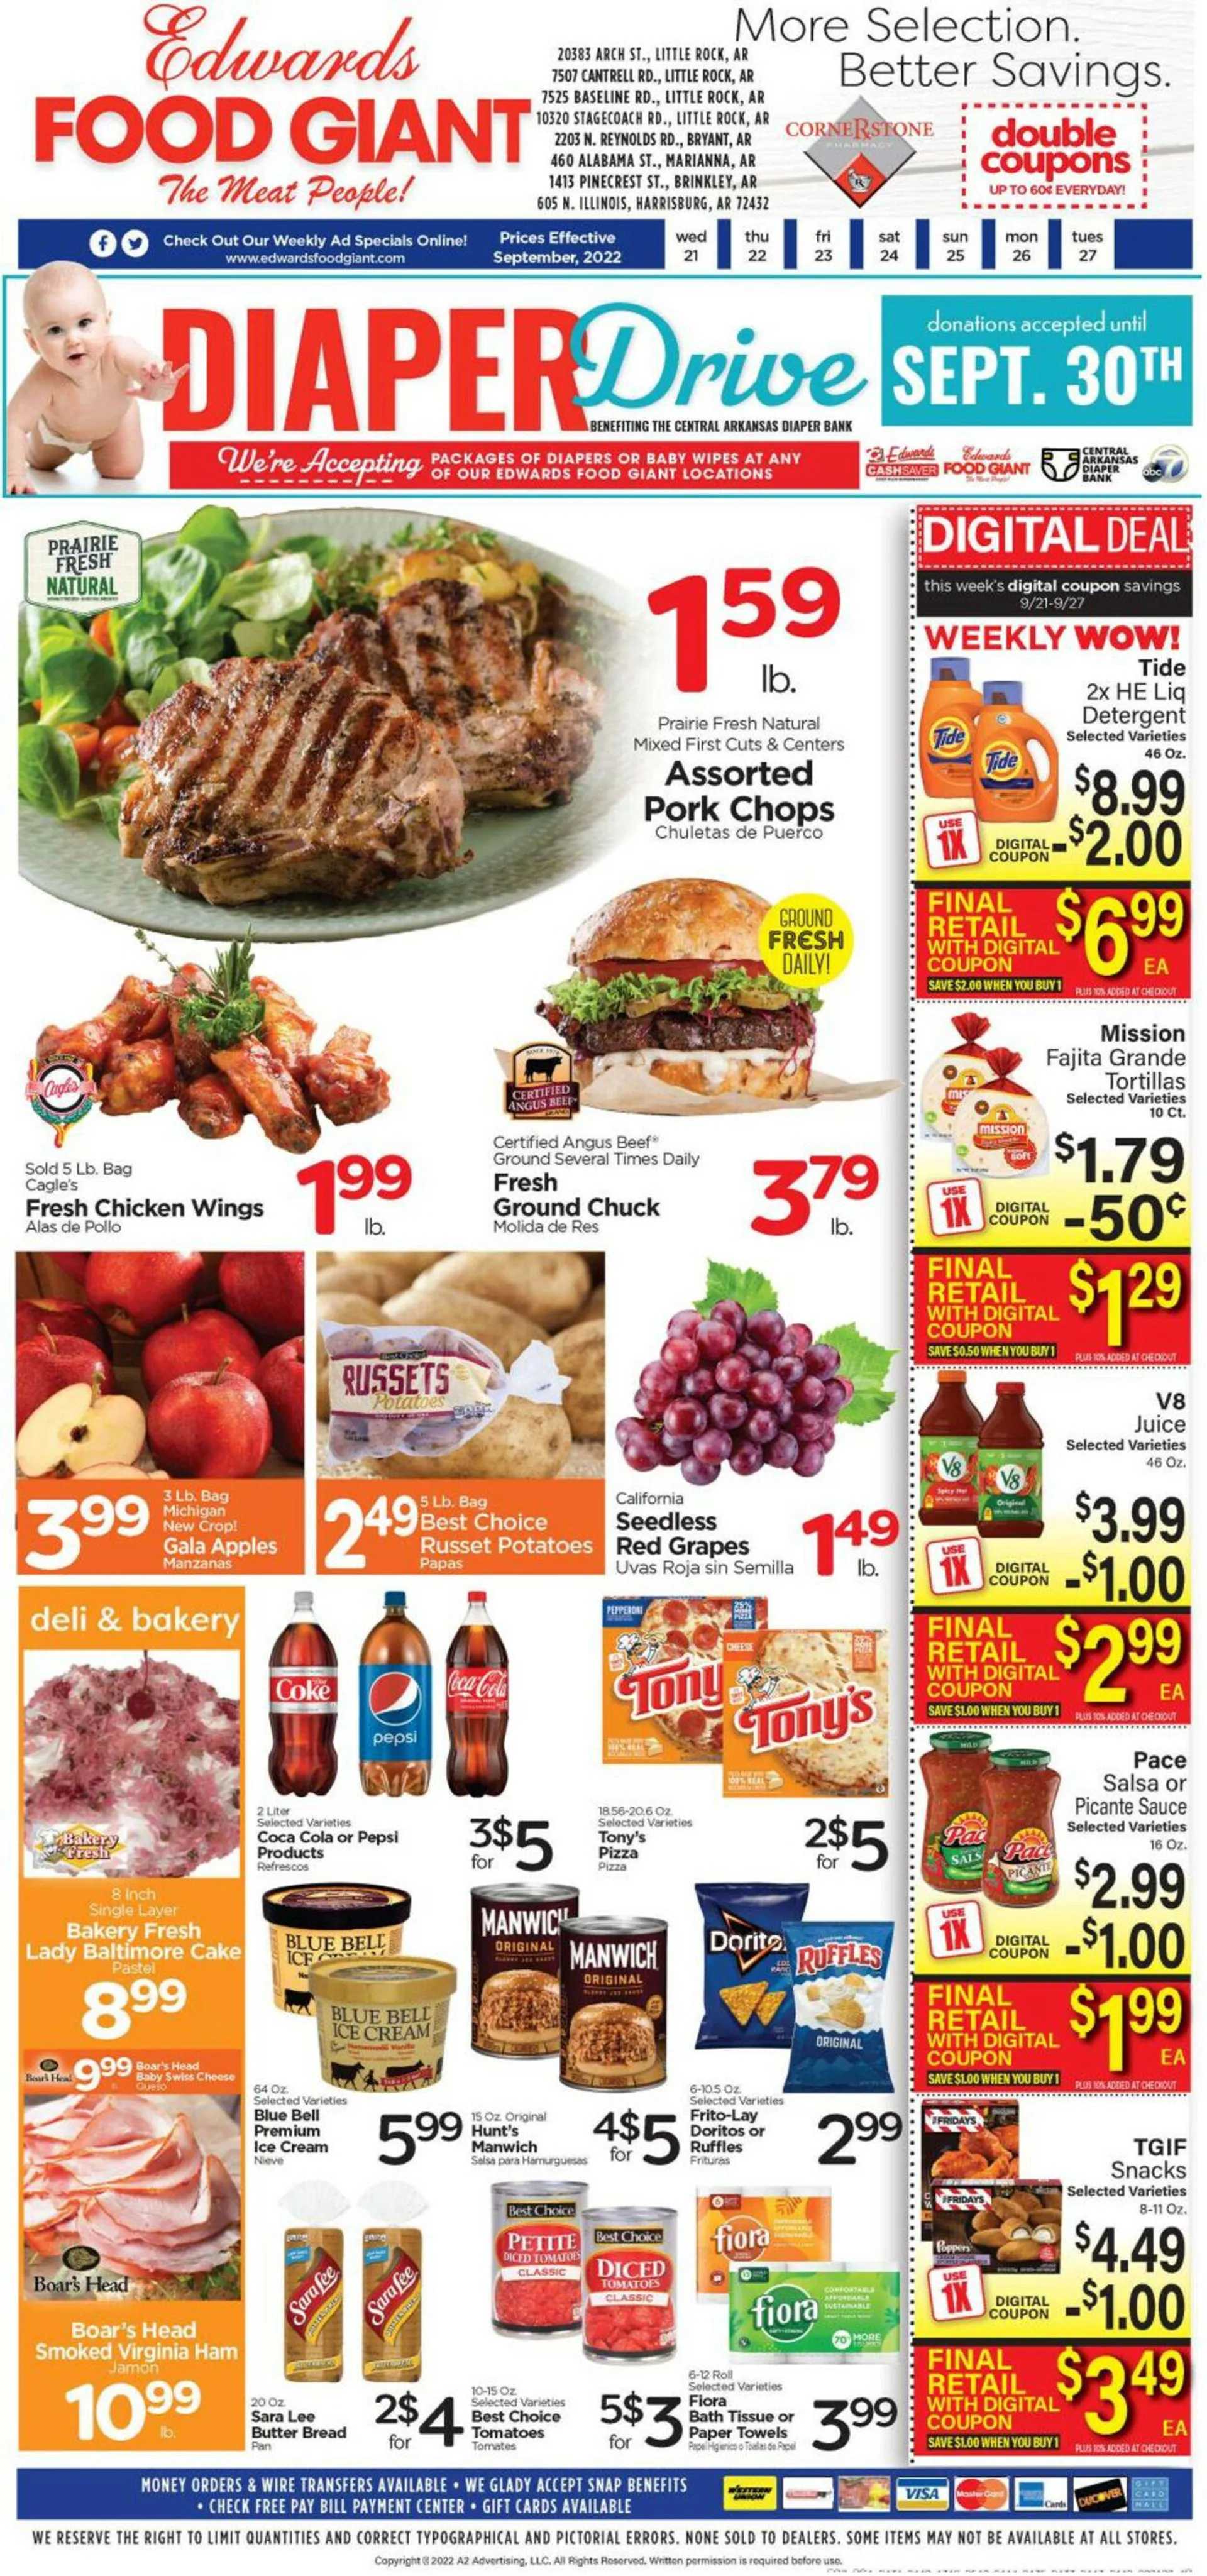 Edwards Food Giant Current weekly ad - 1